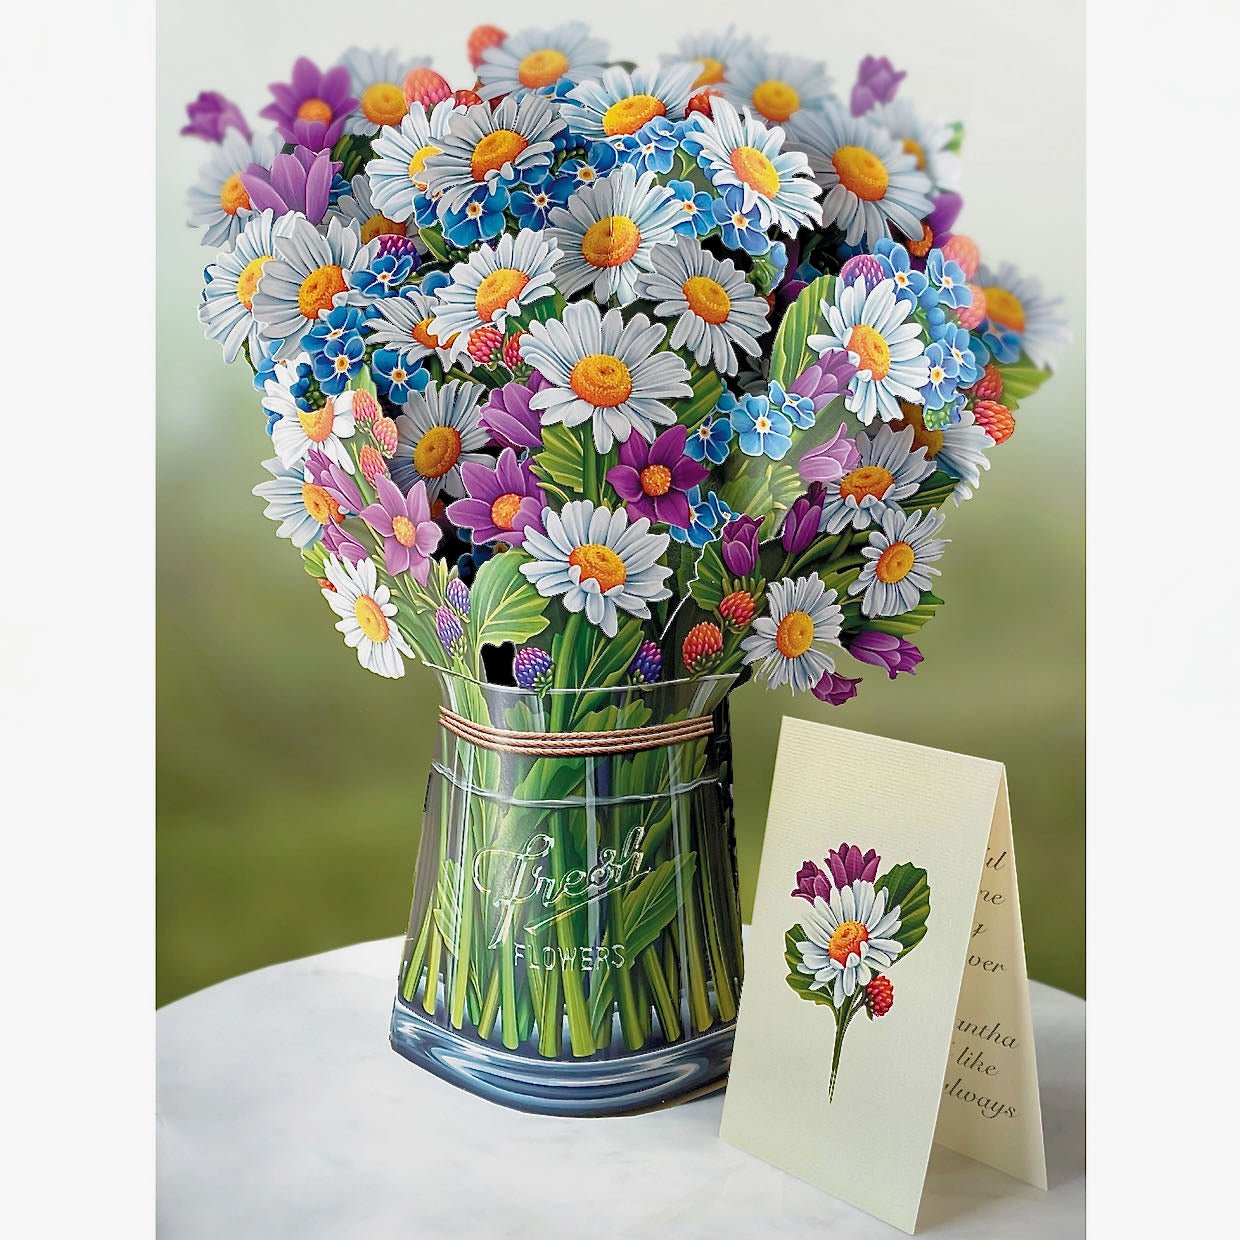 3D Life-Sized Paper Daisies & Wildflowers Bouquet Pop Up Greeting Card - Marmalade Mercantile